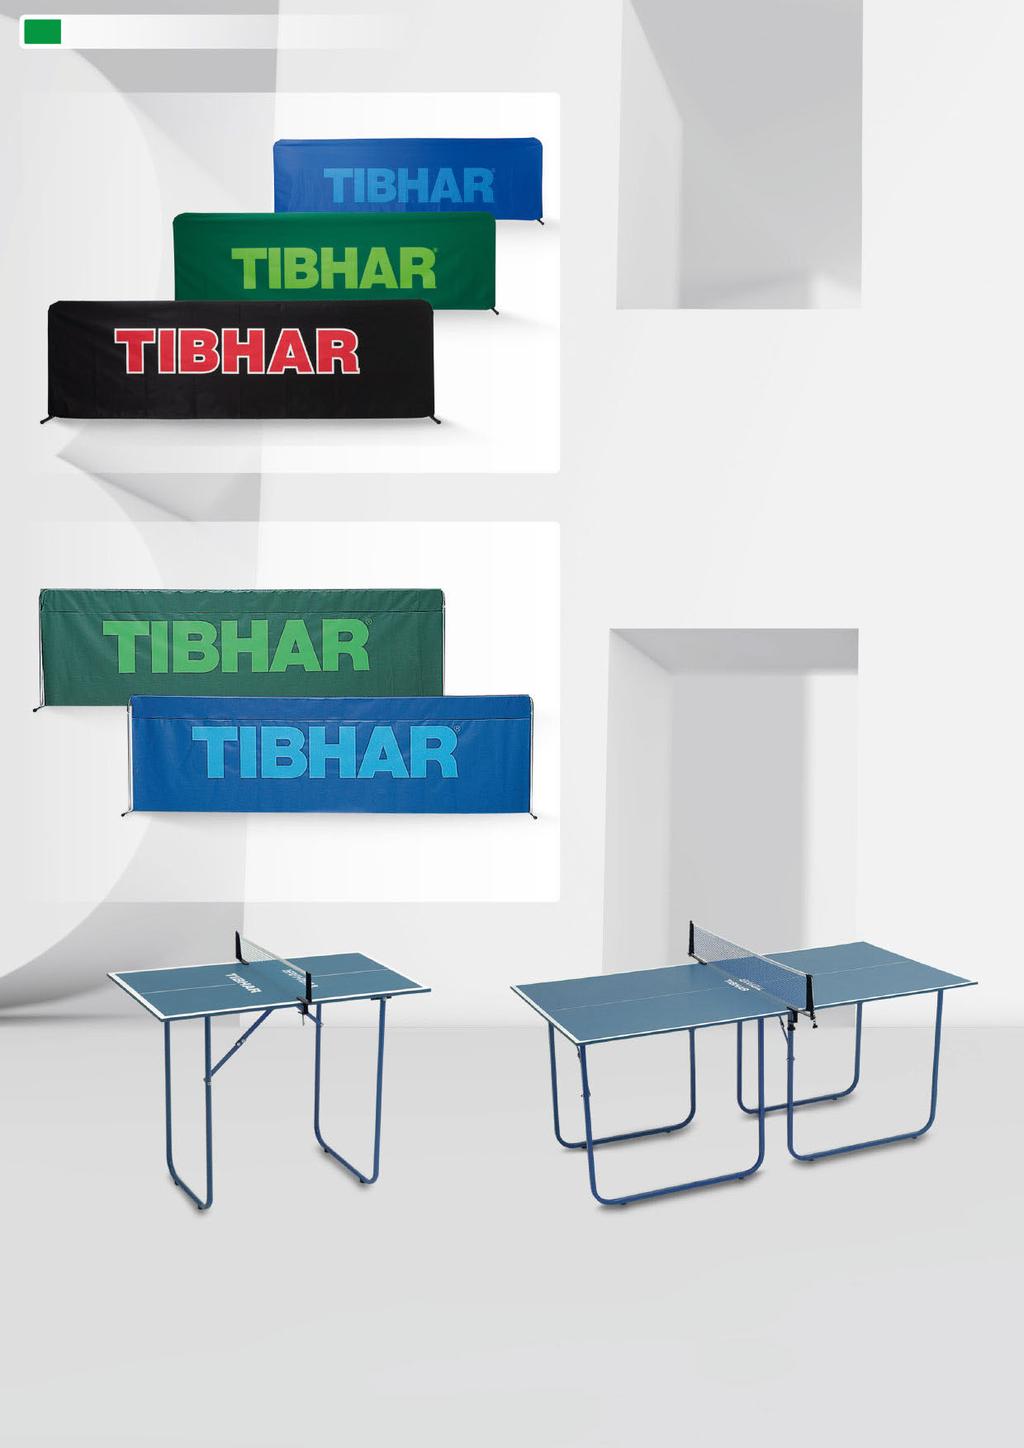 64 ACCESSORIES SURROUNDS FULLCOVER Robust 210D nylon cloth Covers the rods completely Steel pipe rods Only available with TIBHAR logo imprint on one side Available in green, blue and black 2.